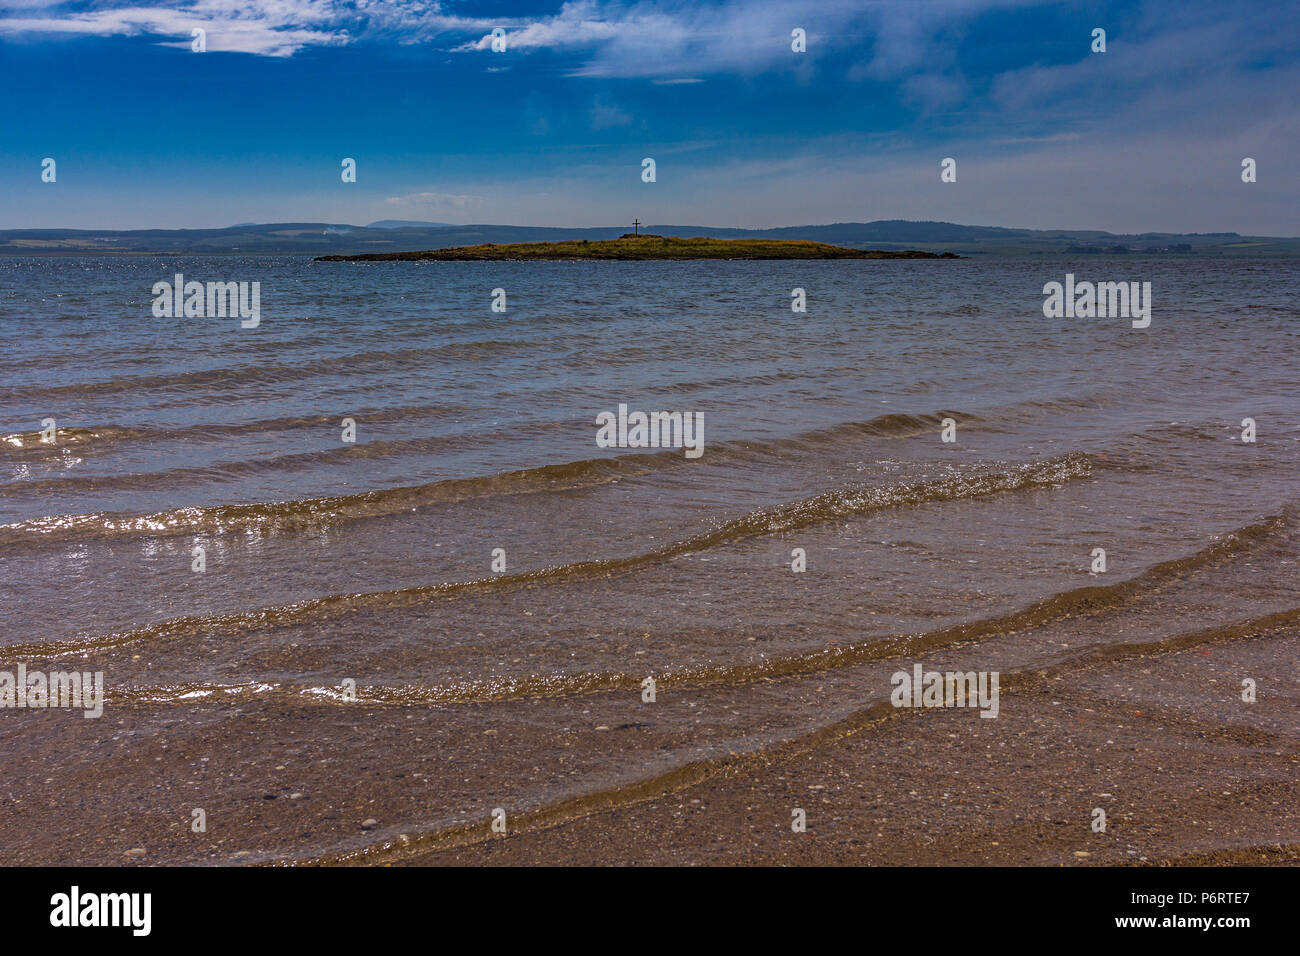 The Holy Island of Lindisfarne, Northumberland, England, looking across to St. Cuthbert’s Island at high tide Stock Photo